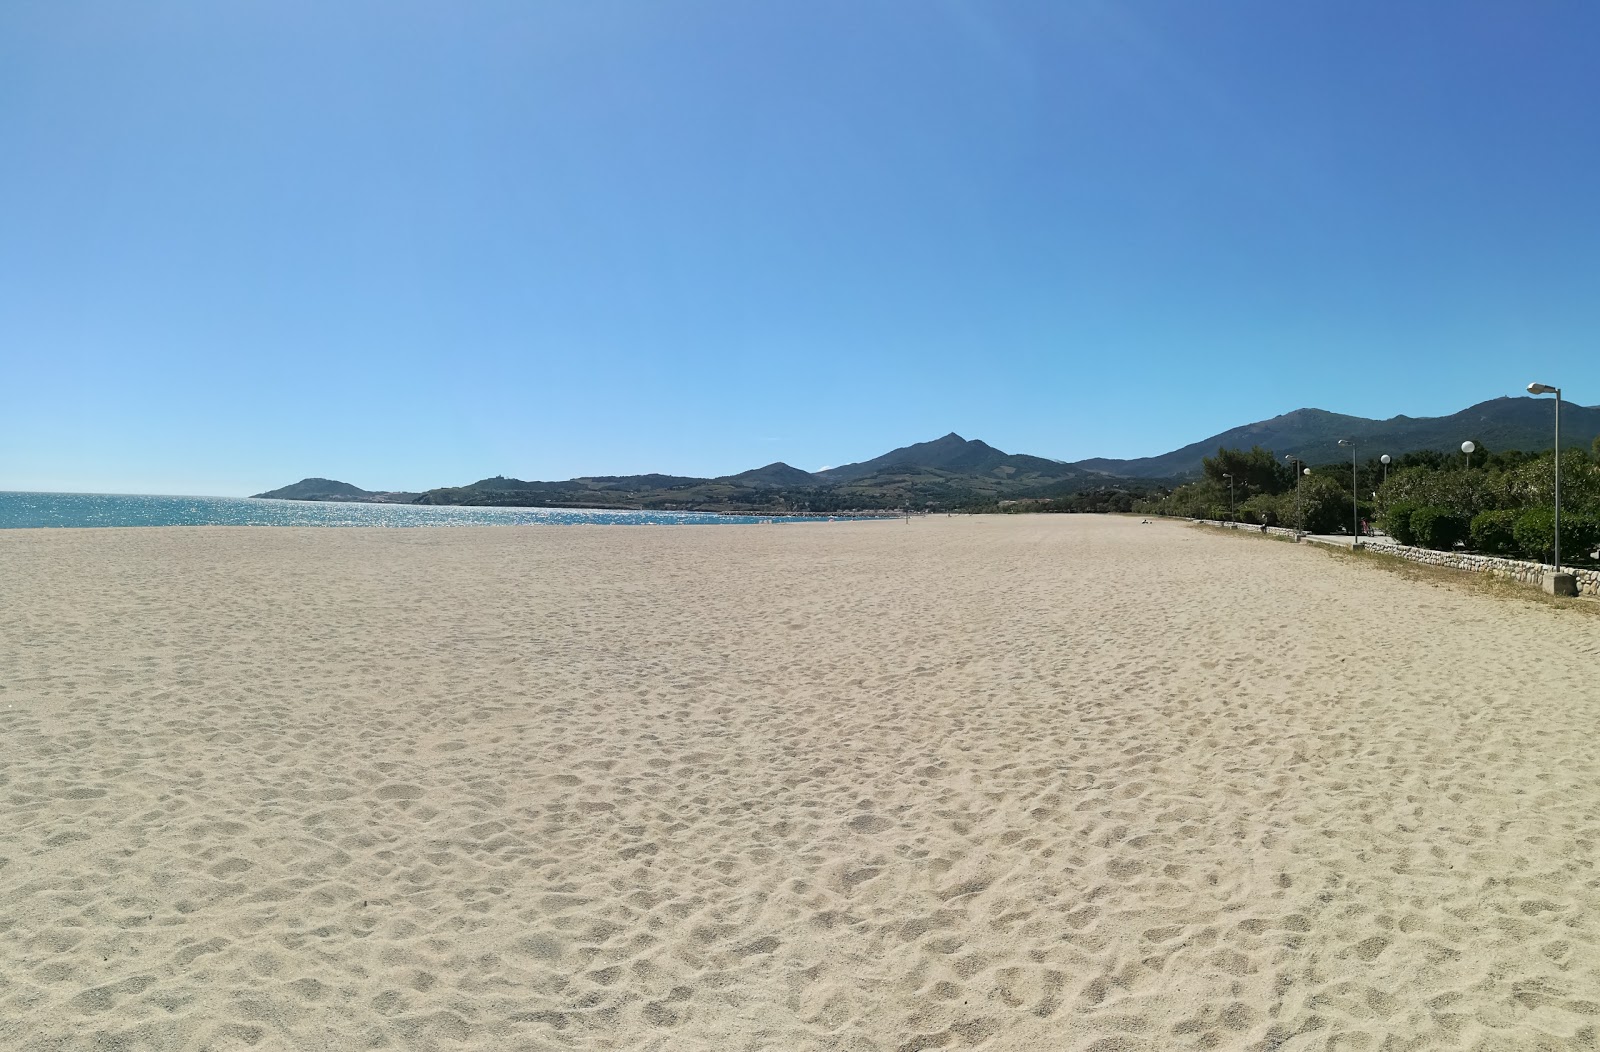 Photo of Pins beach and its beautiful scenery